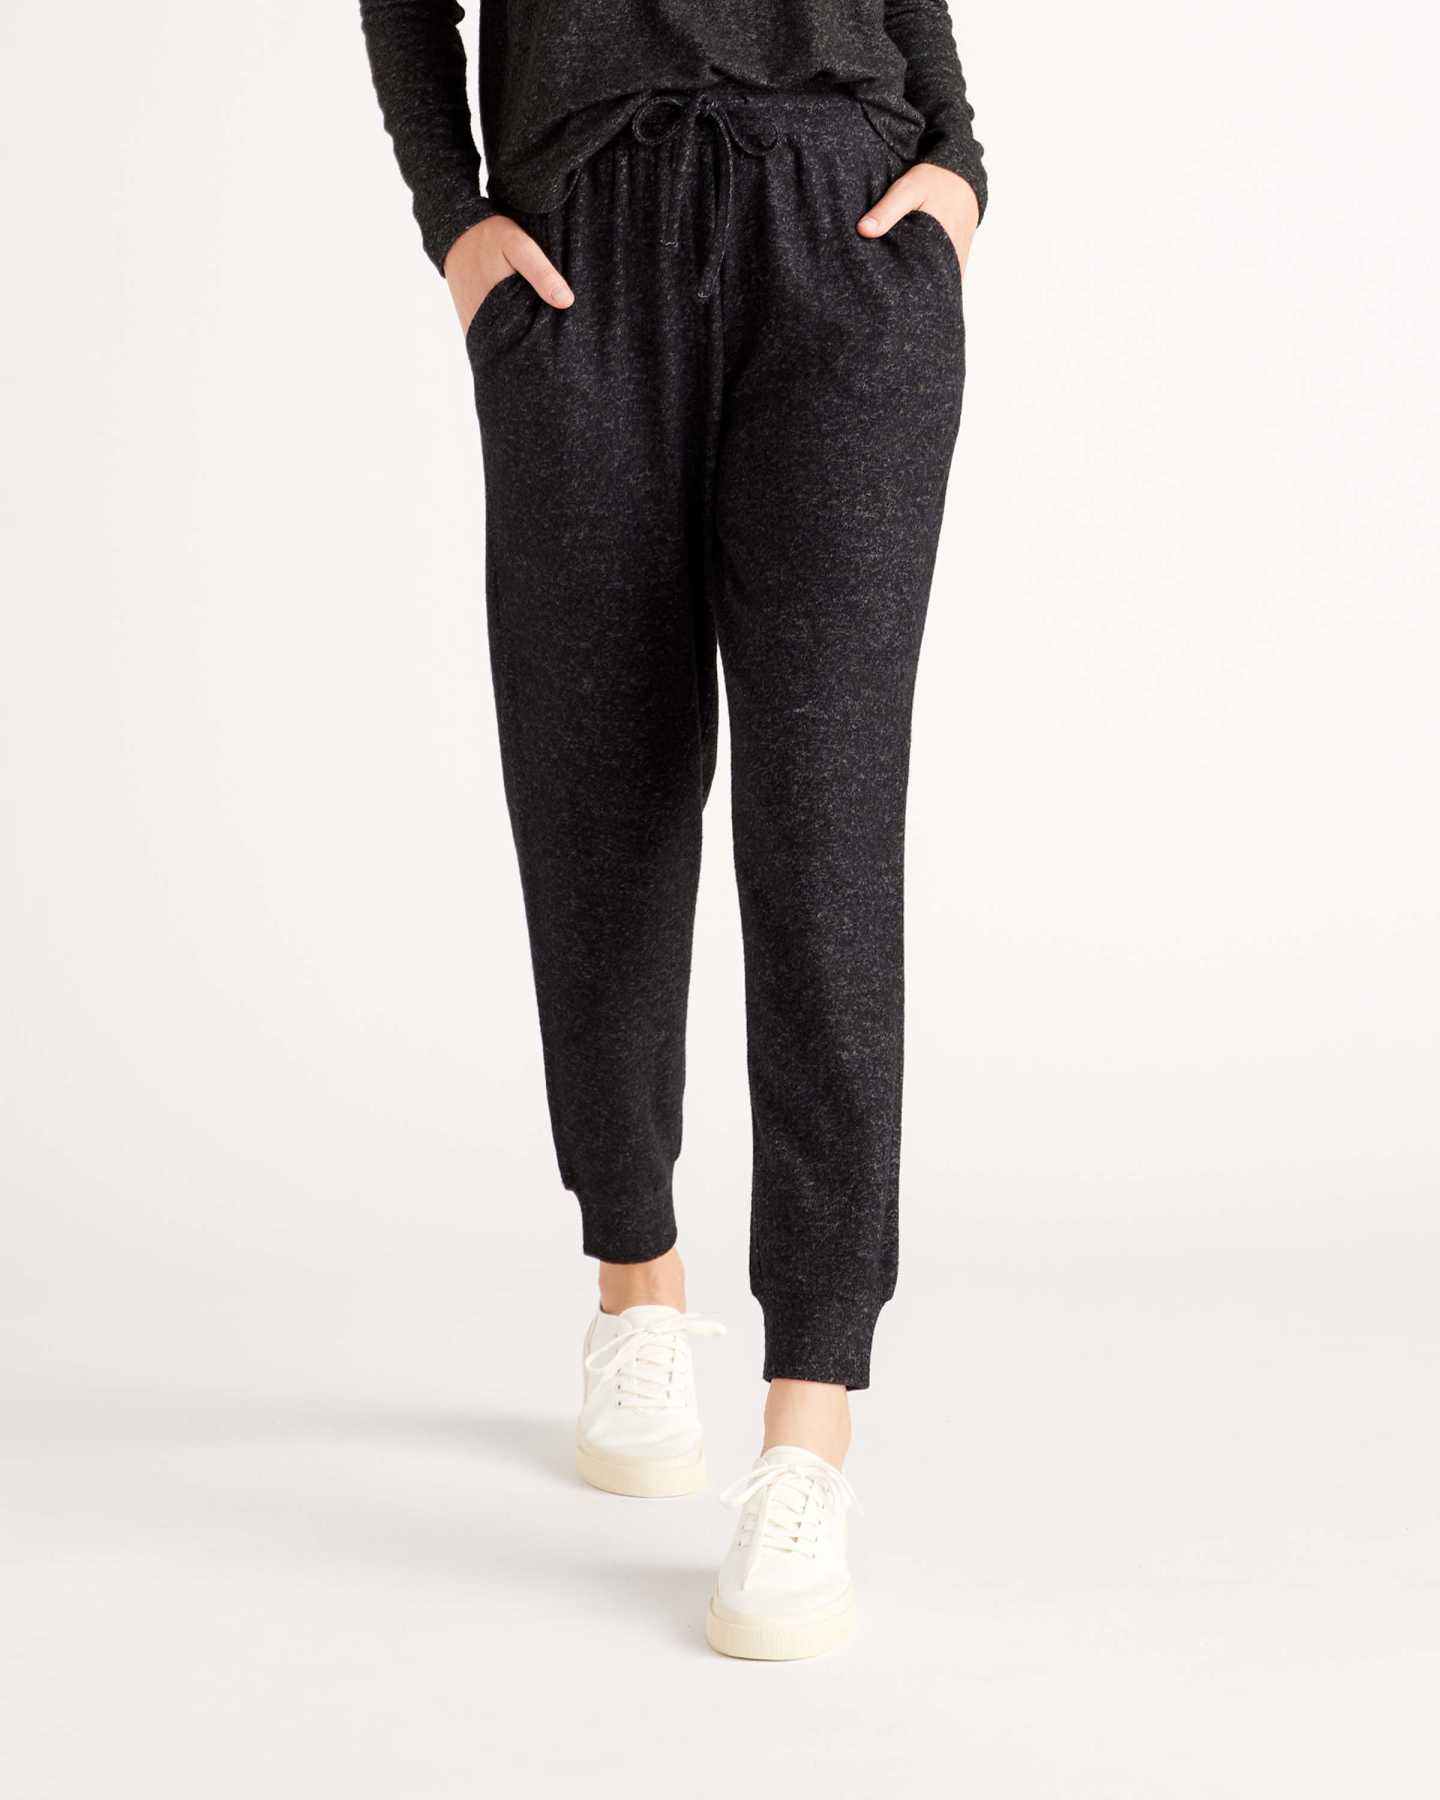 You May Also Like - Brushed Lounge Jogger - Charcoal